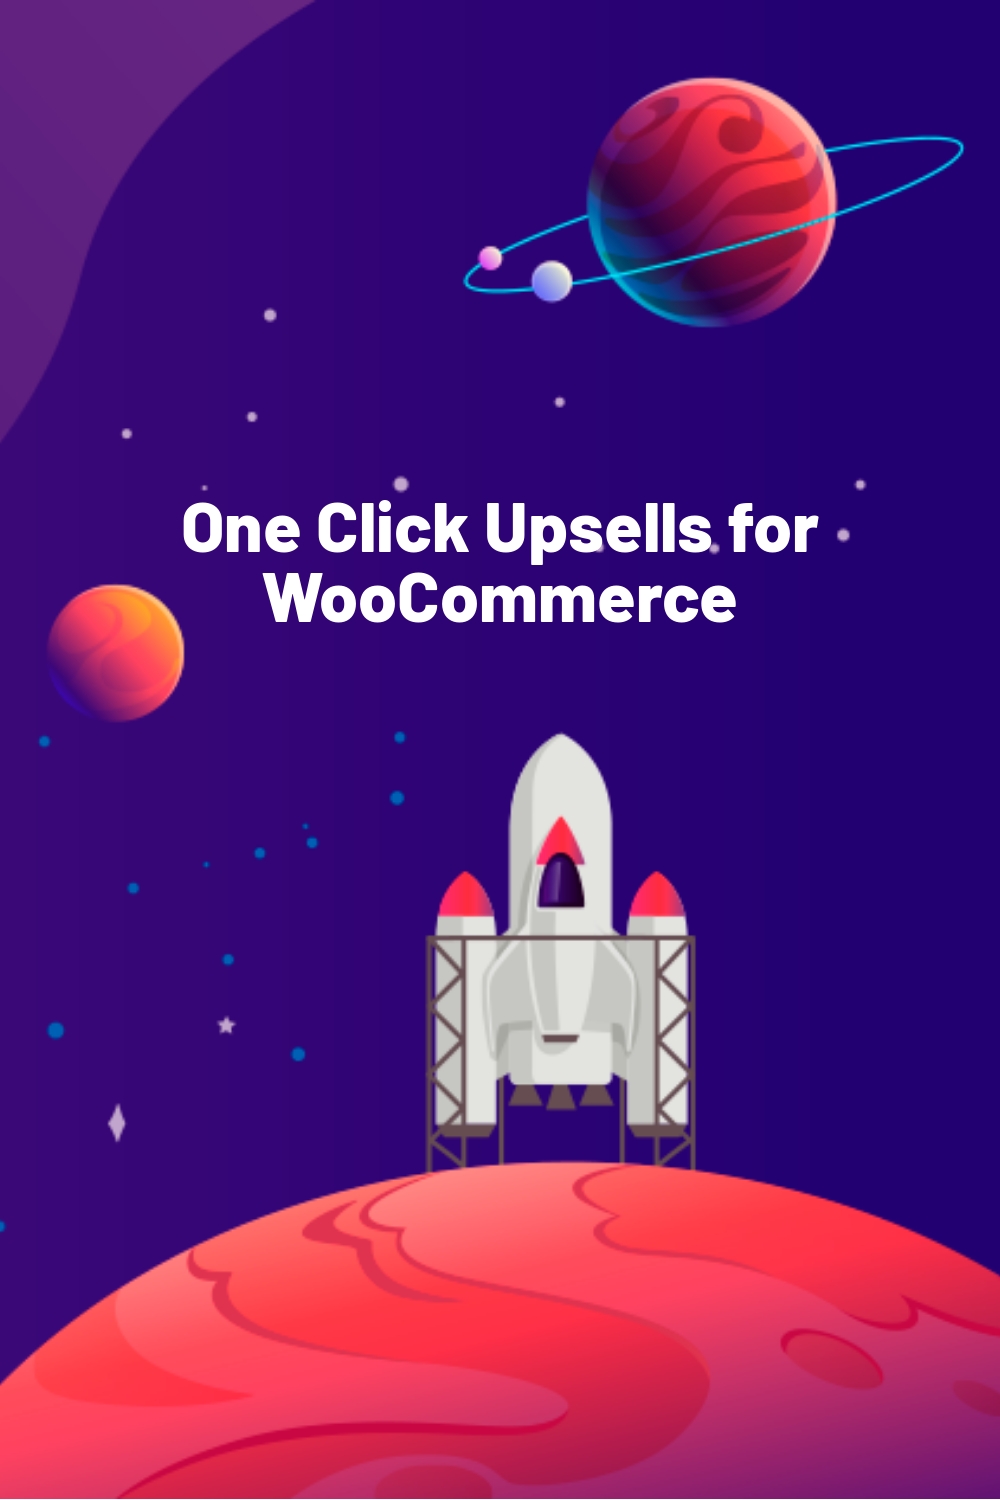 One Click Upsells for WooCommerce